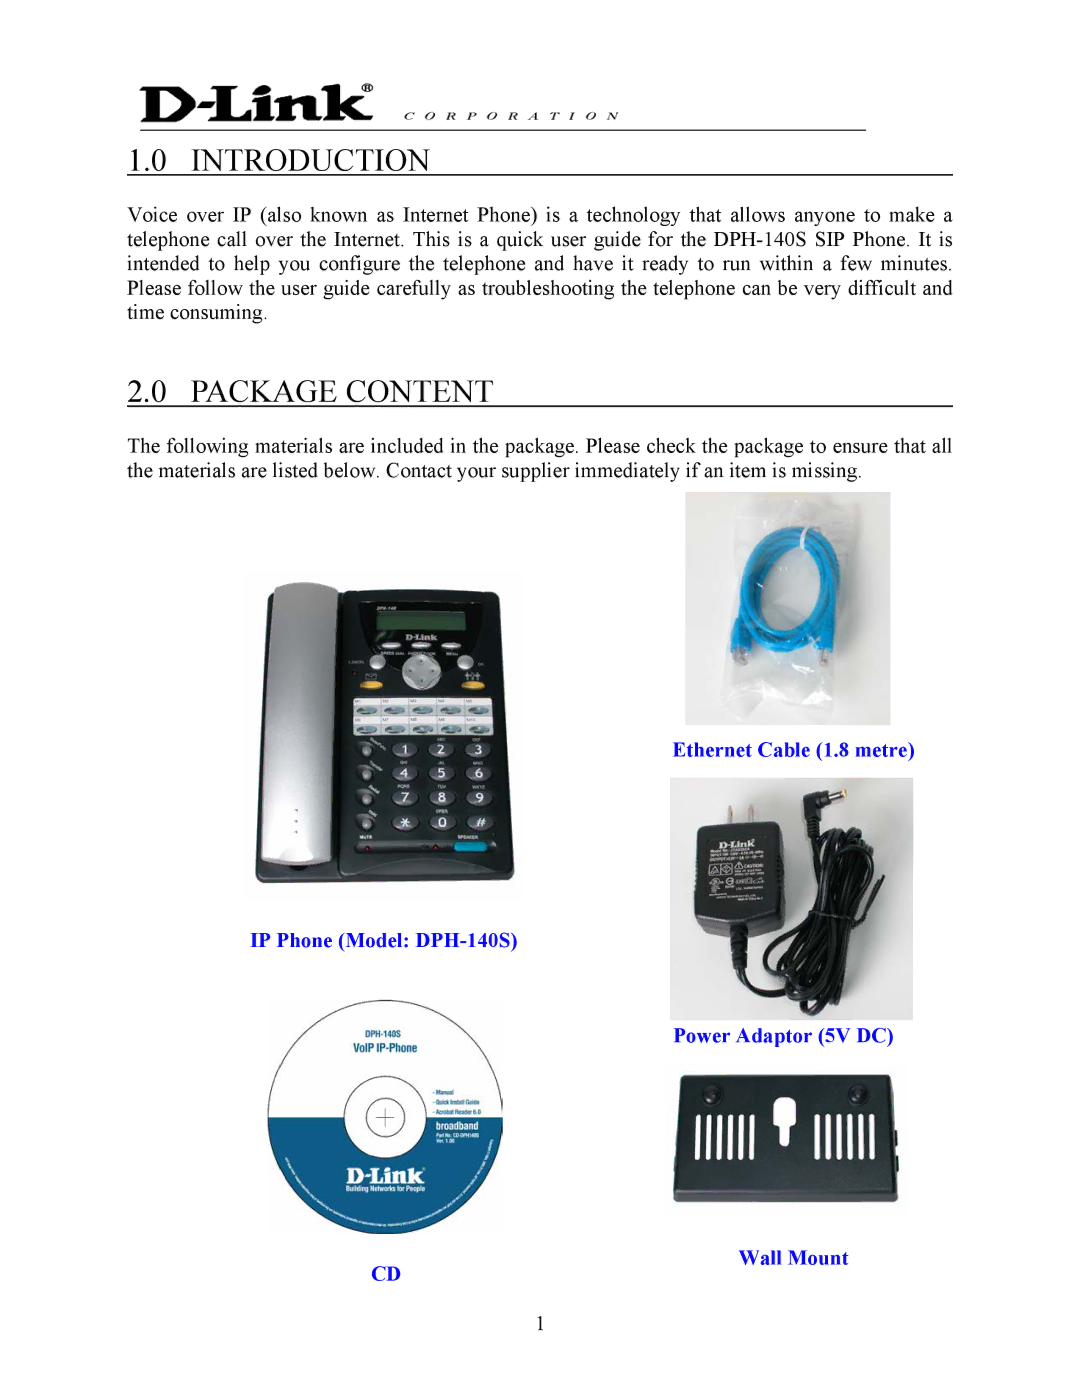 D-Link DPH-140S manual Introduction, Package Content 